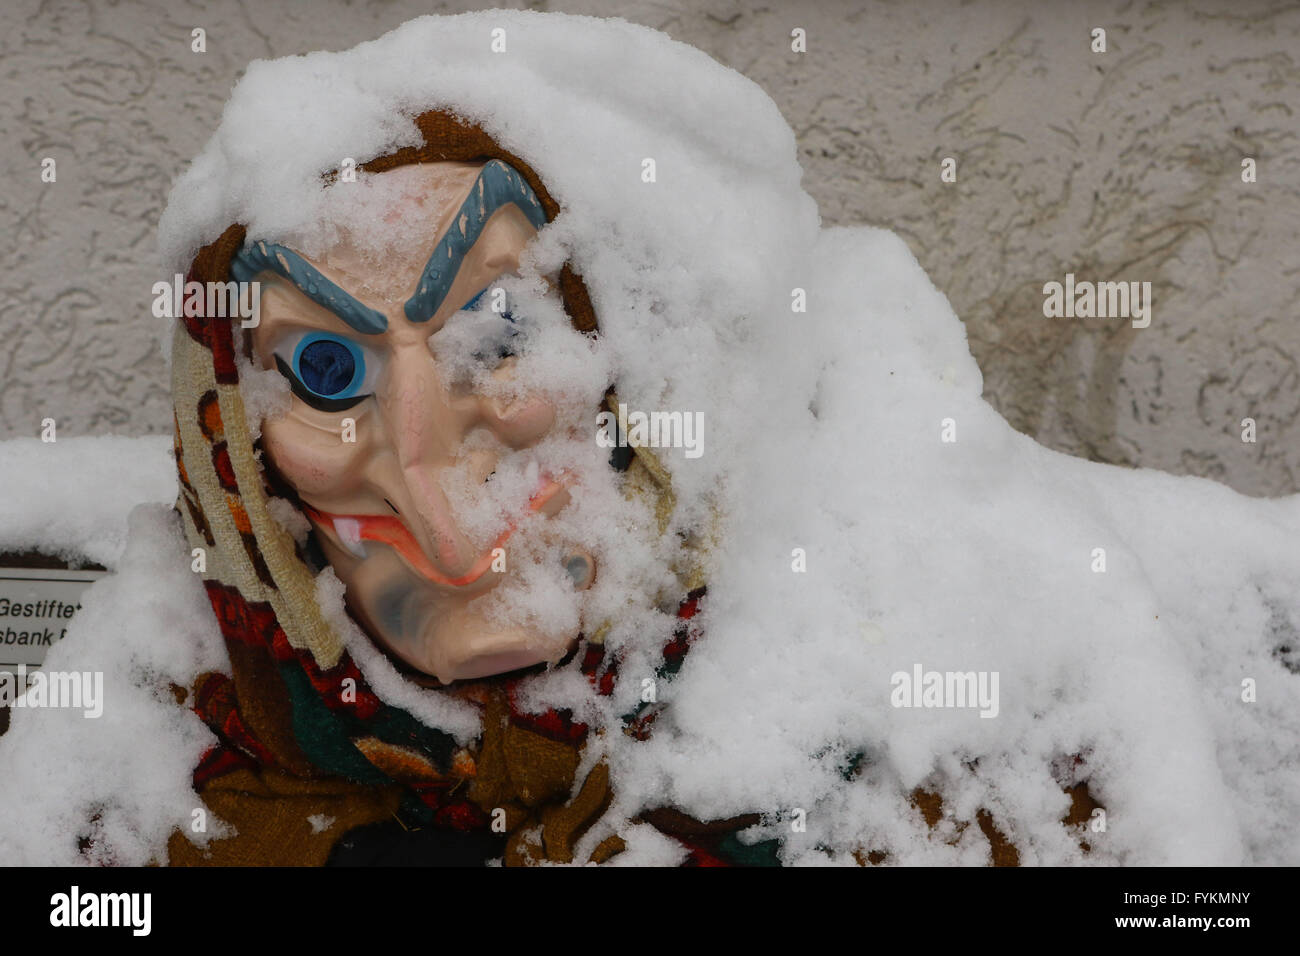 A witch figure sits on a snow-covered bench in Hohegeiss, Germany, 27 April 2016. Photo: MATTHIAS BEIN/dpa/lah/lni  - NO WIRE SERVICE - Stock Photo